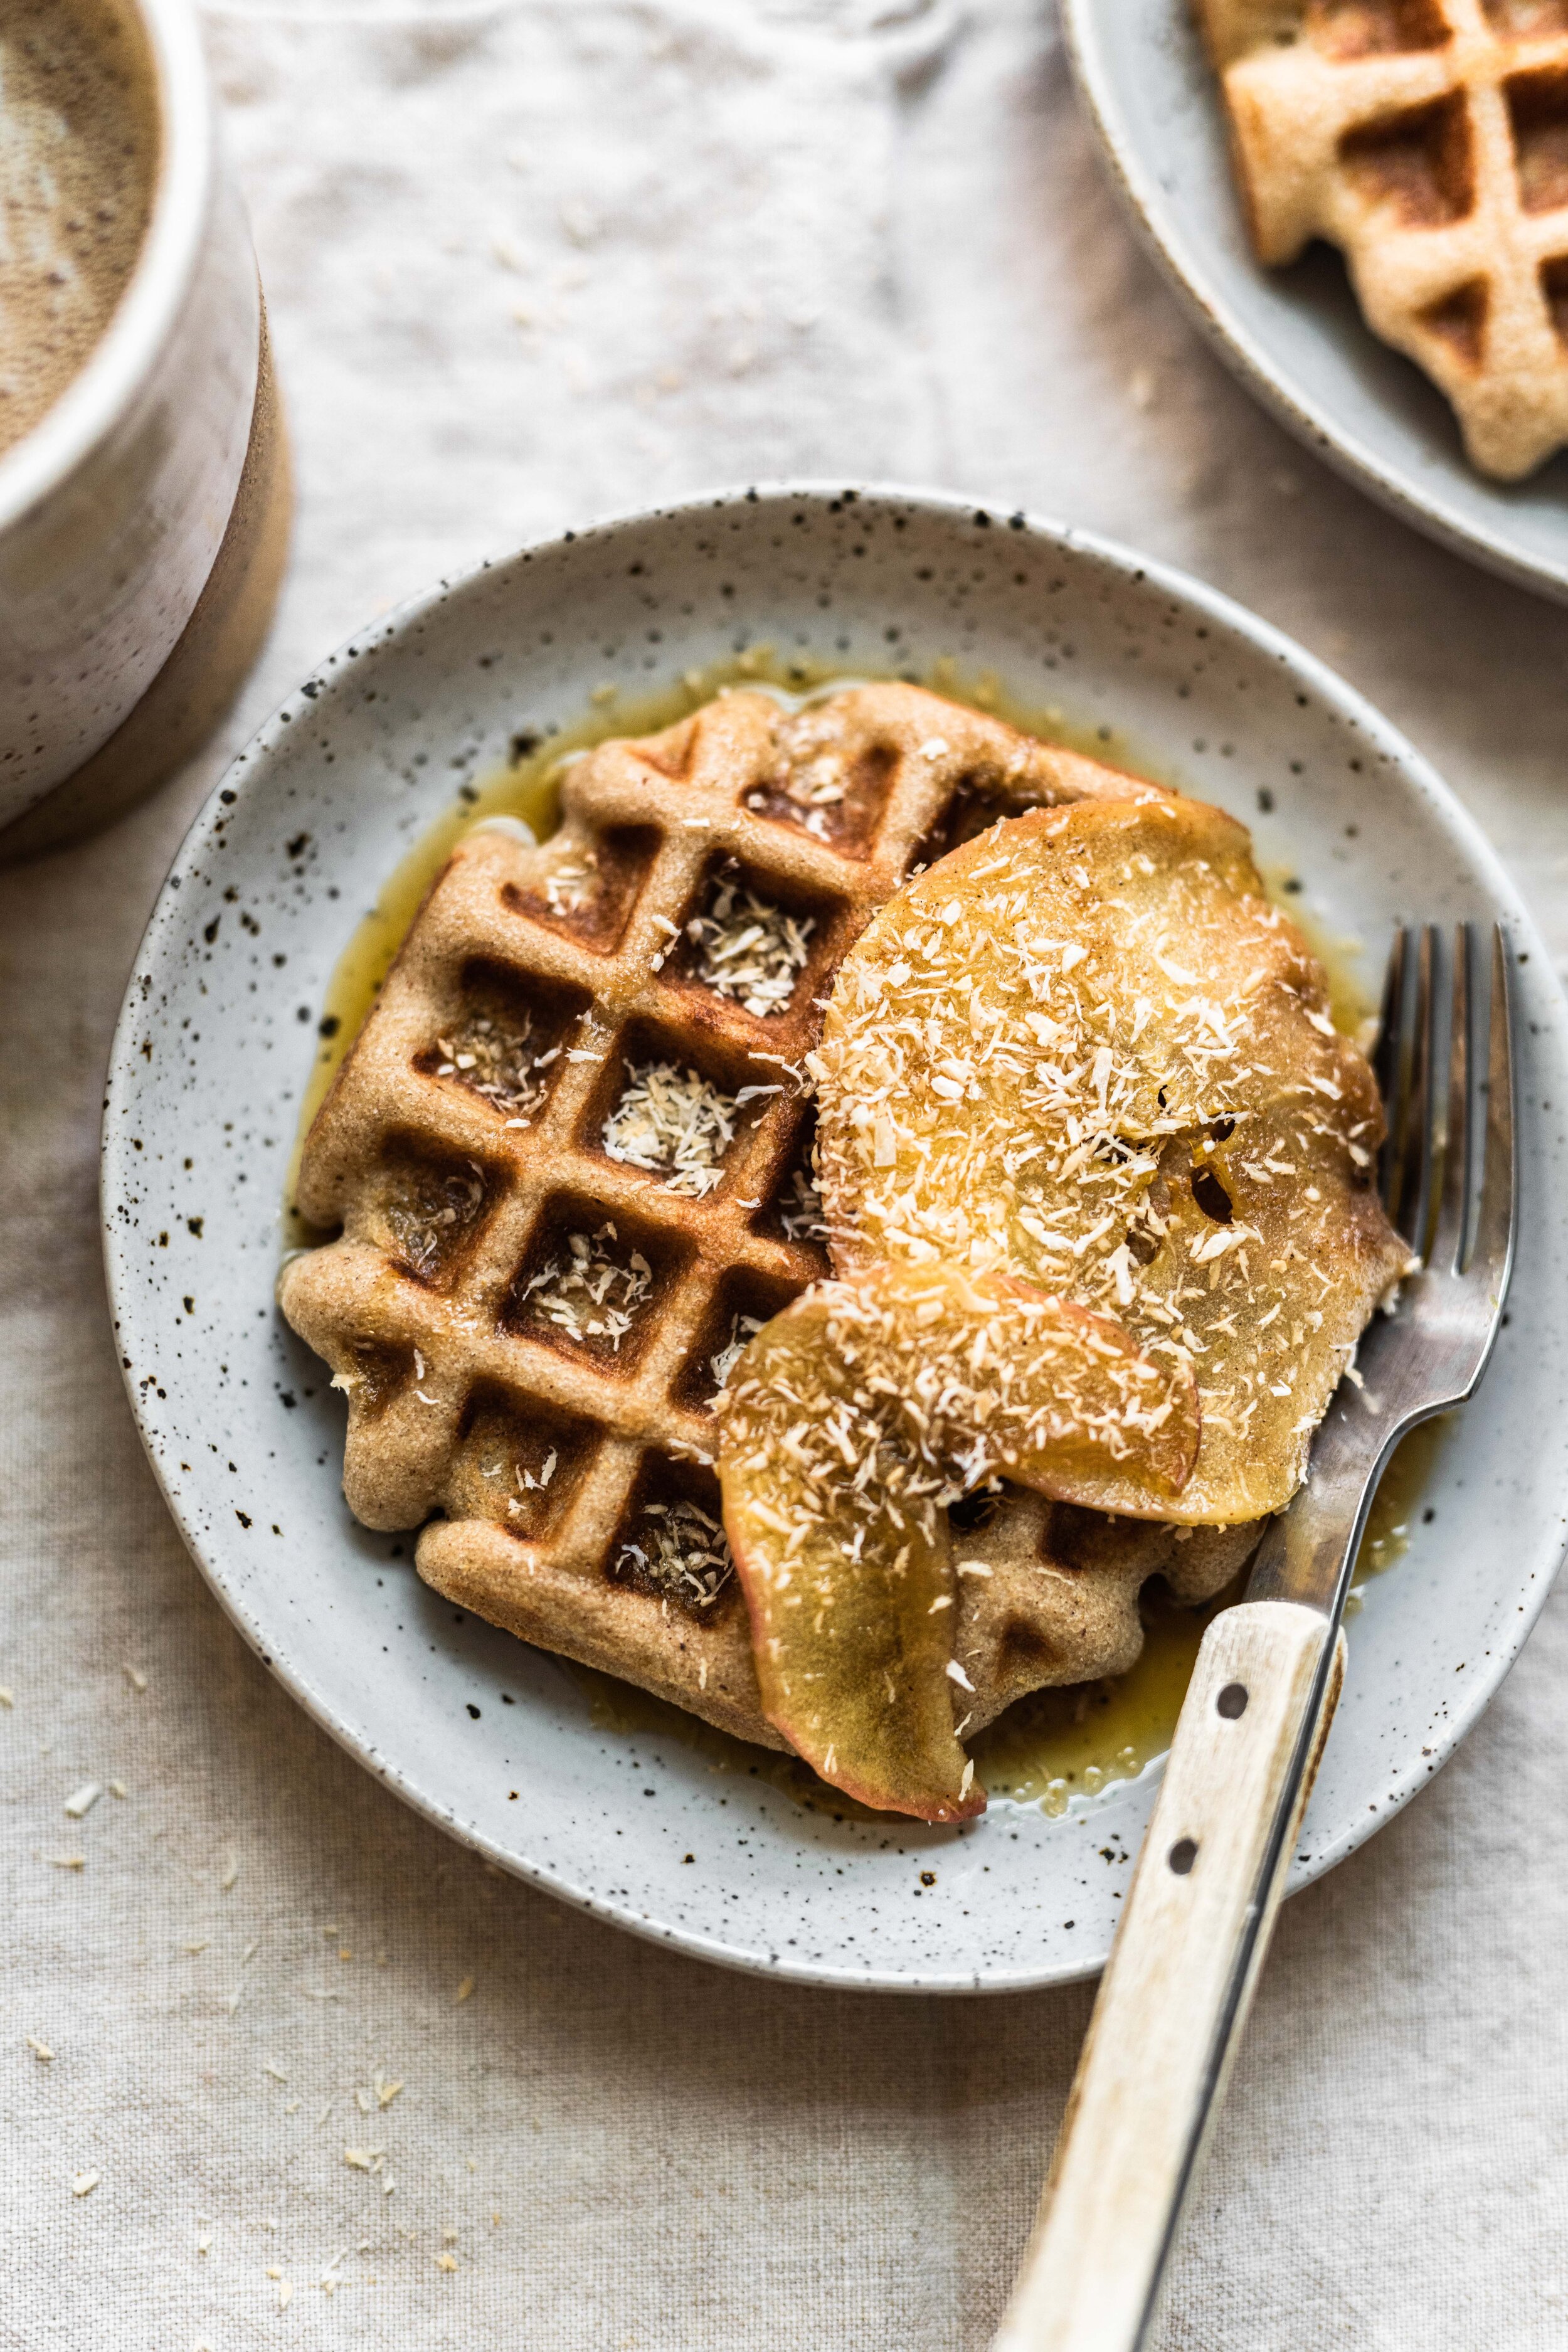 Gingerbread Waffles with Griddled Pears Recipe